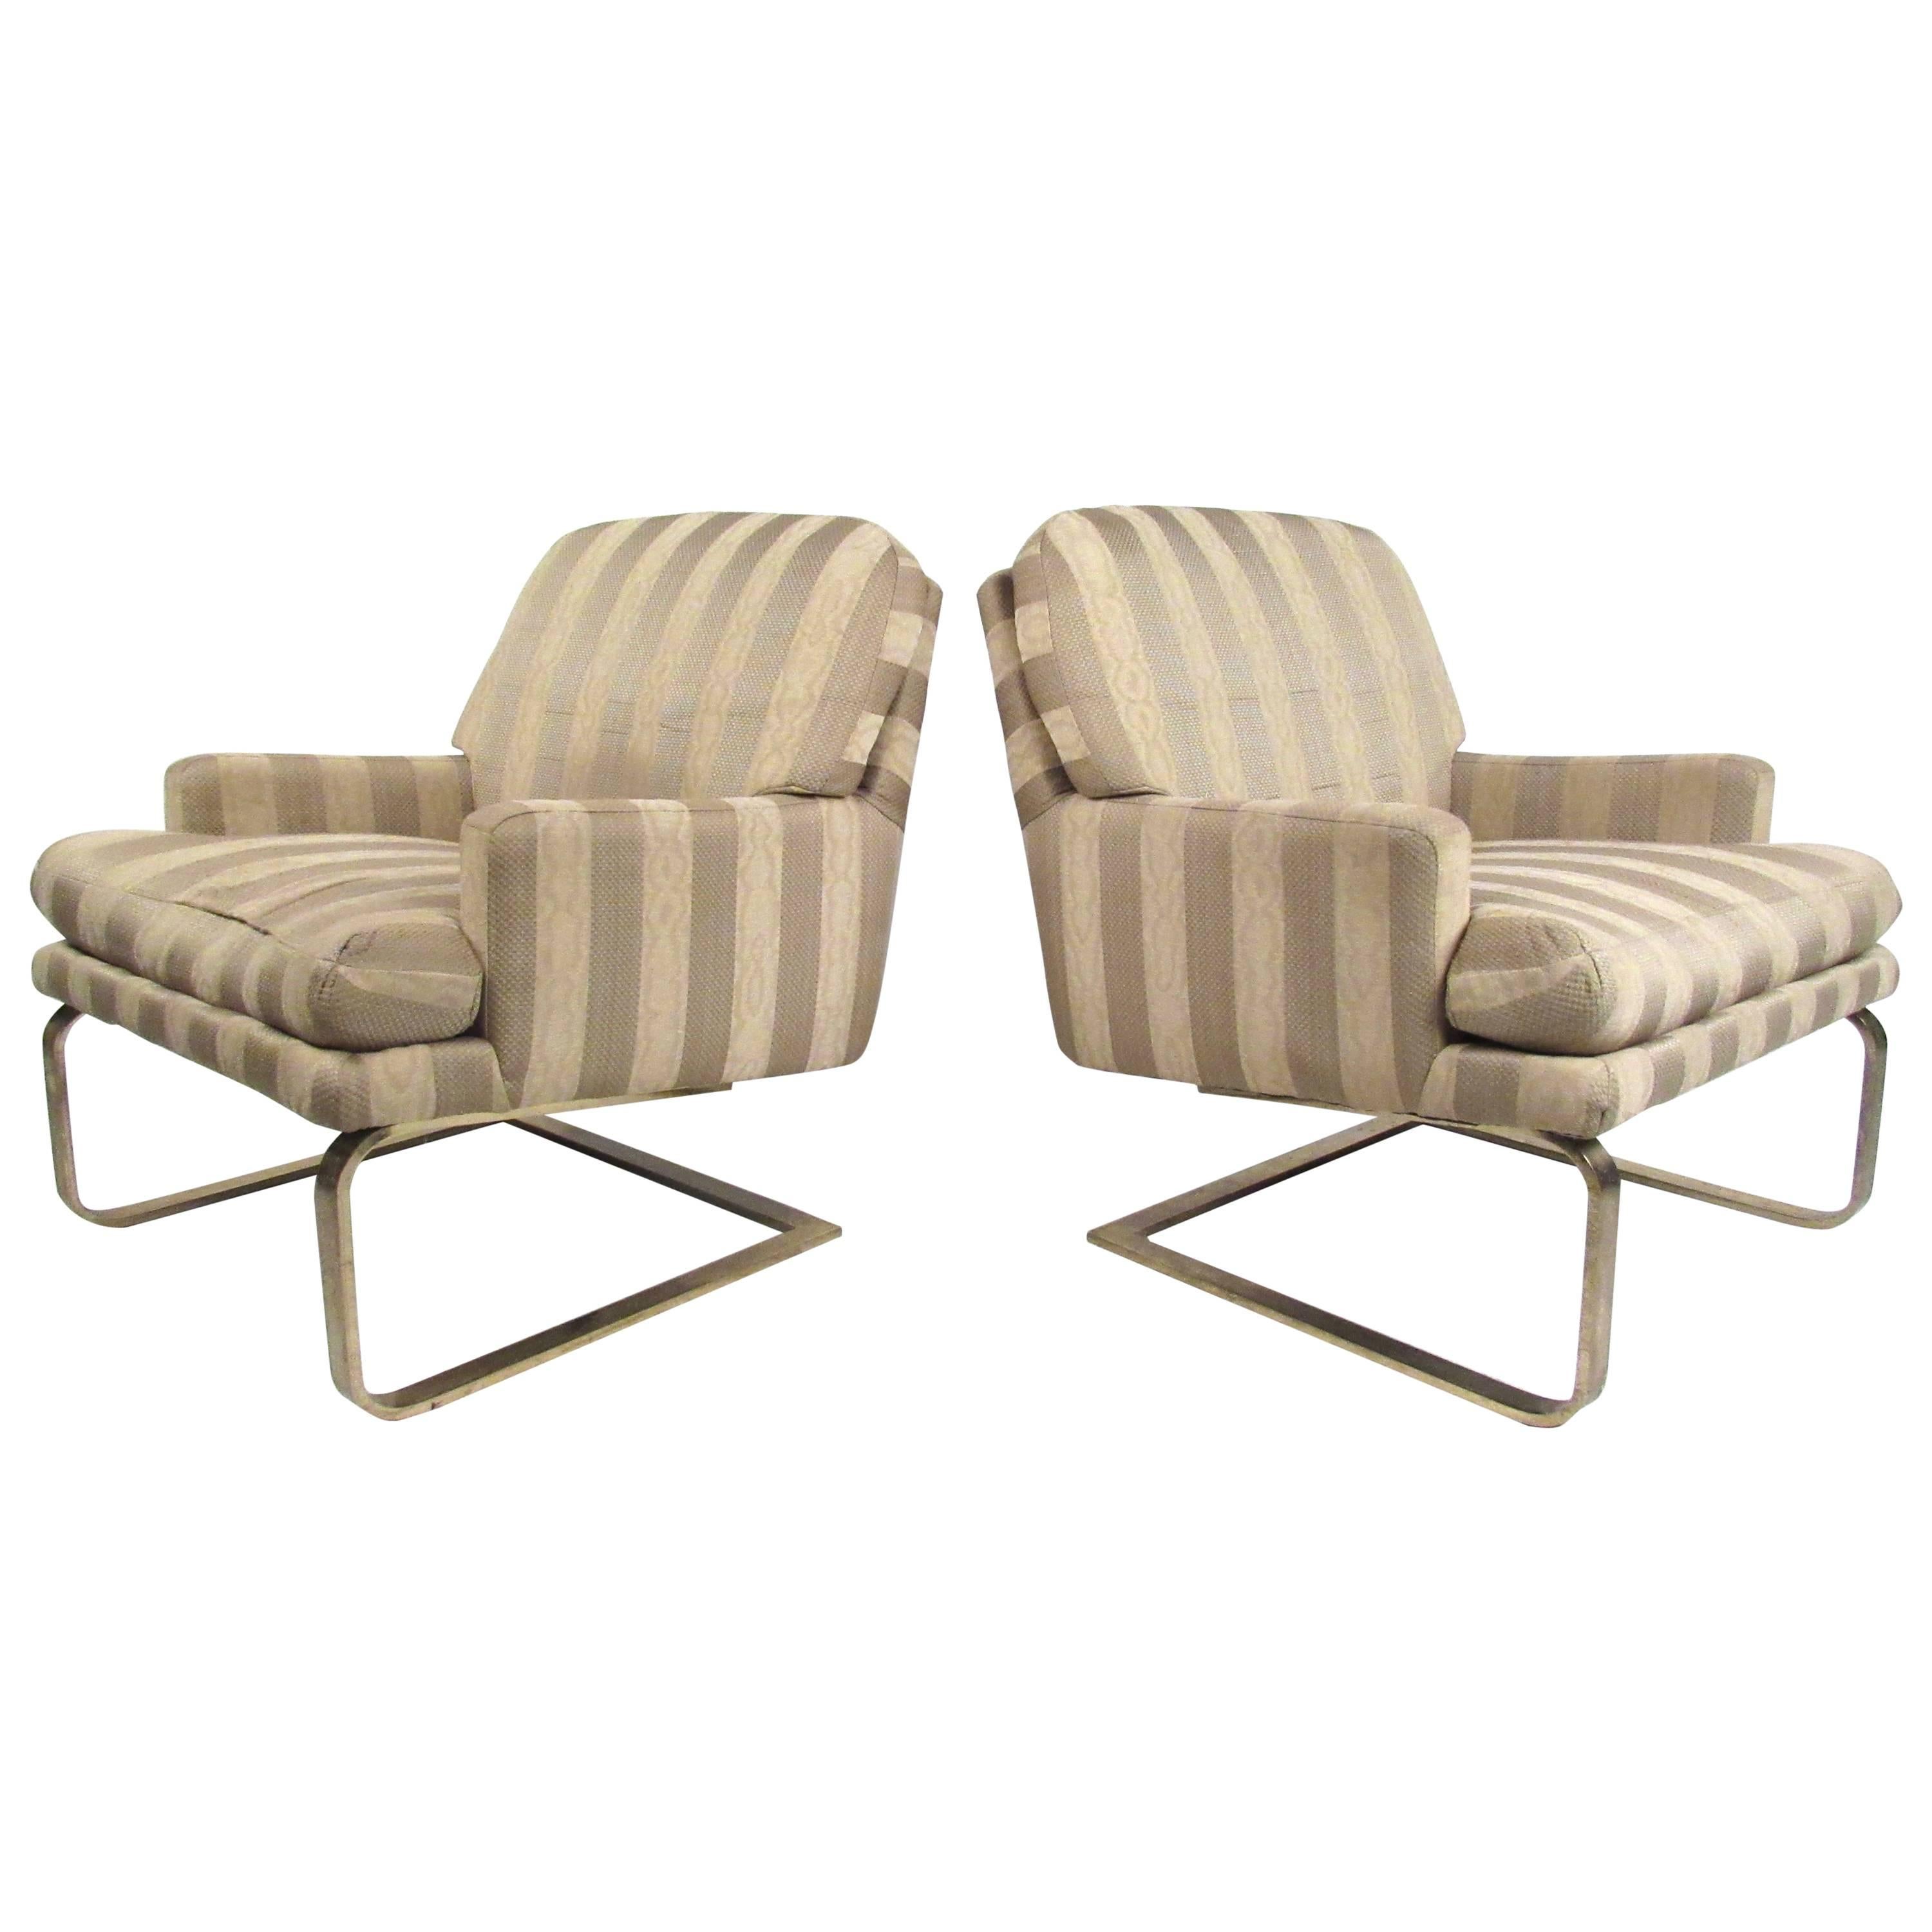 Pair of Mid-Century Modern Cantilever Lounge Chairs by Selig